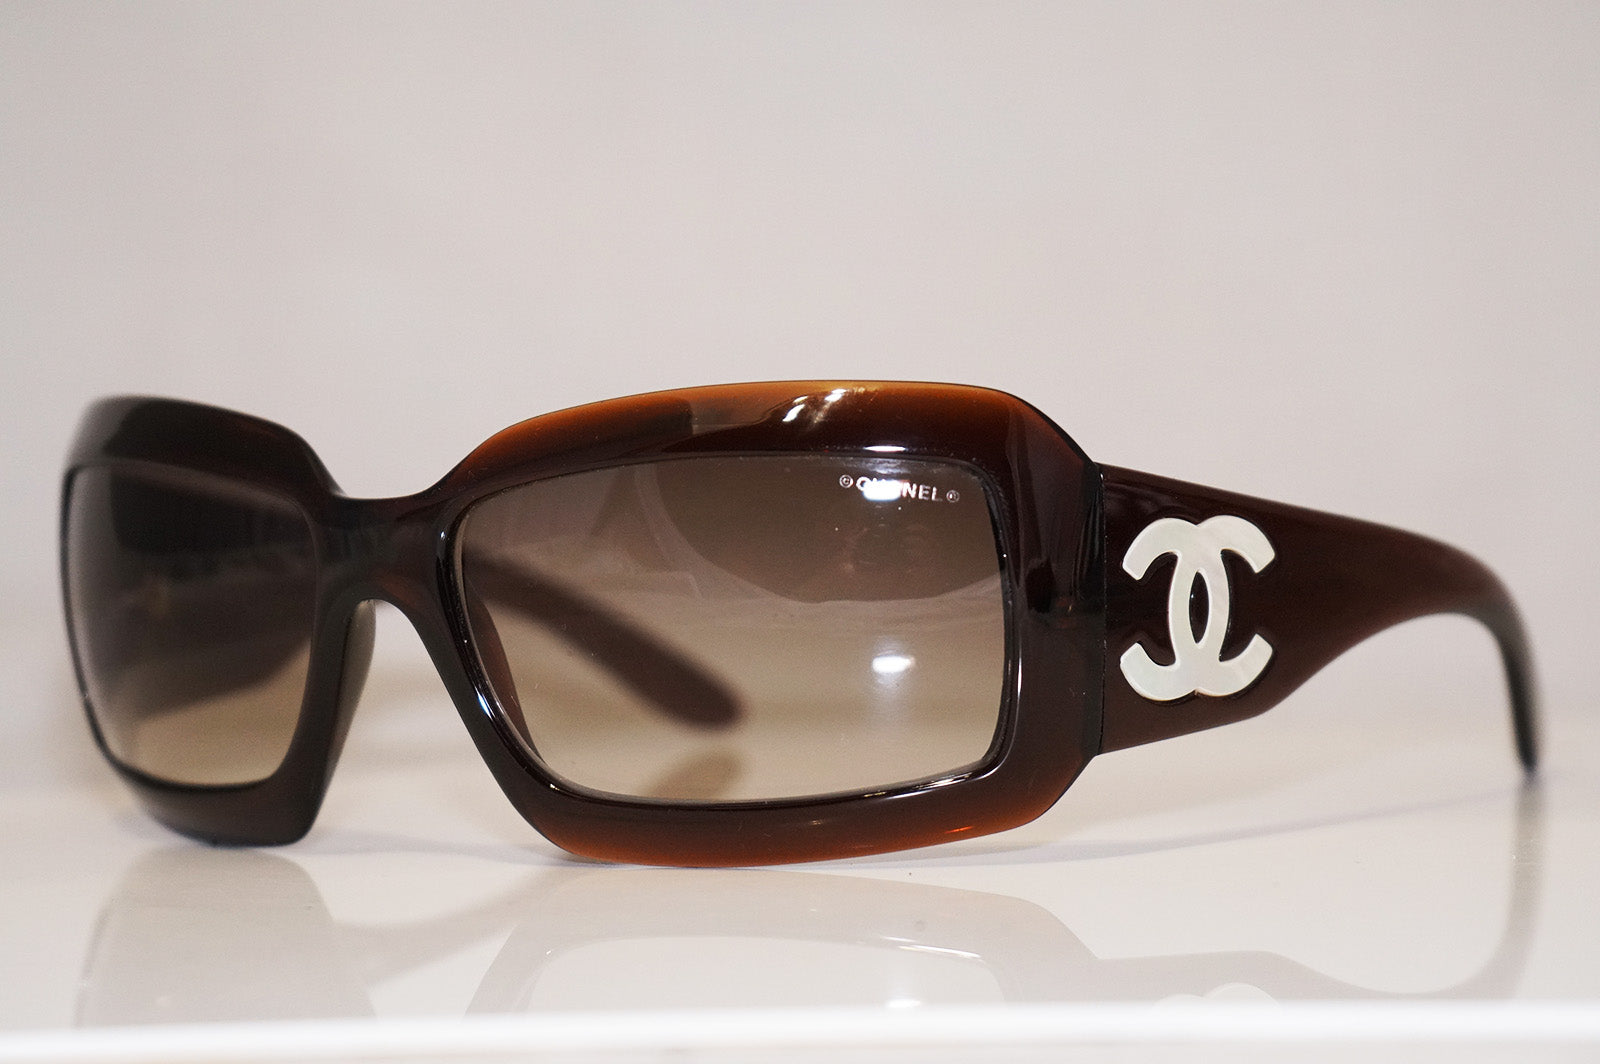 CHANEL Womens Designer Mother of Pearl Sunglasses Brown 5076 C538